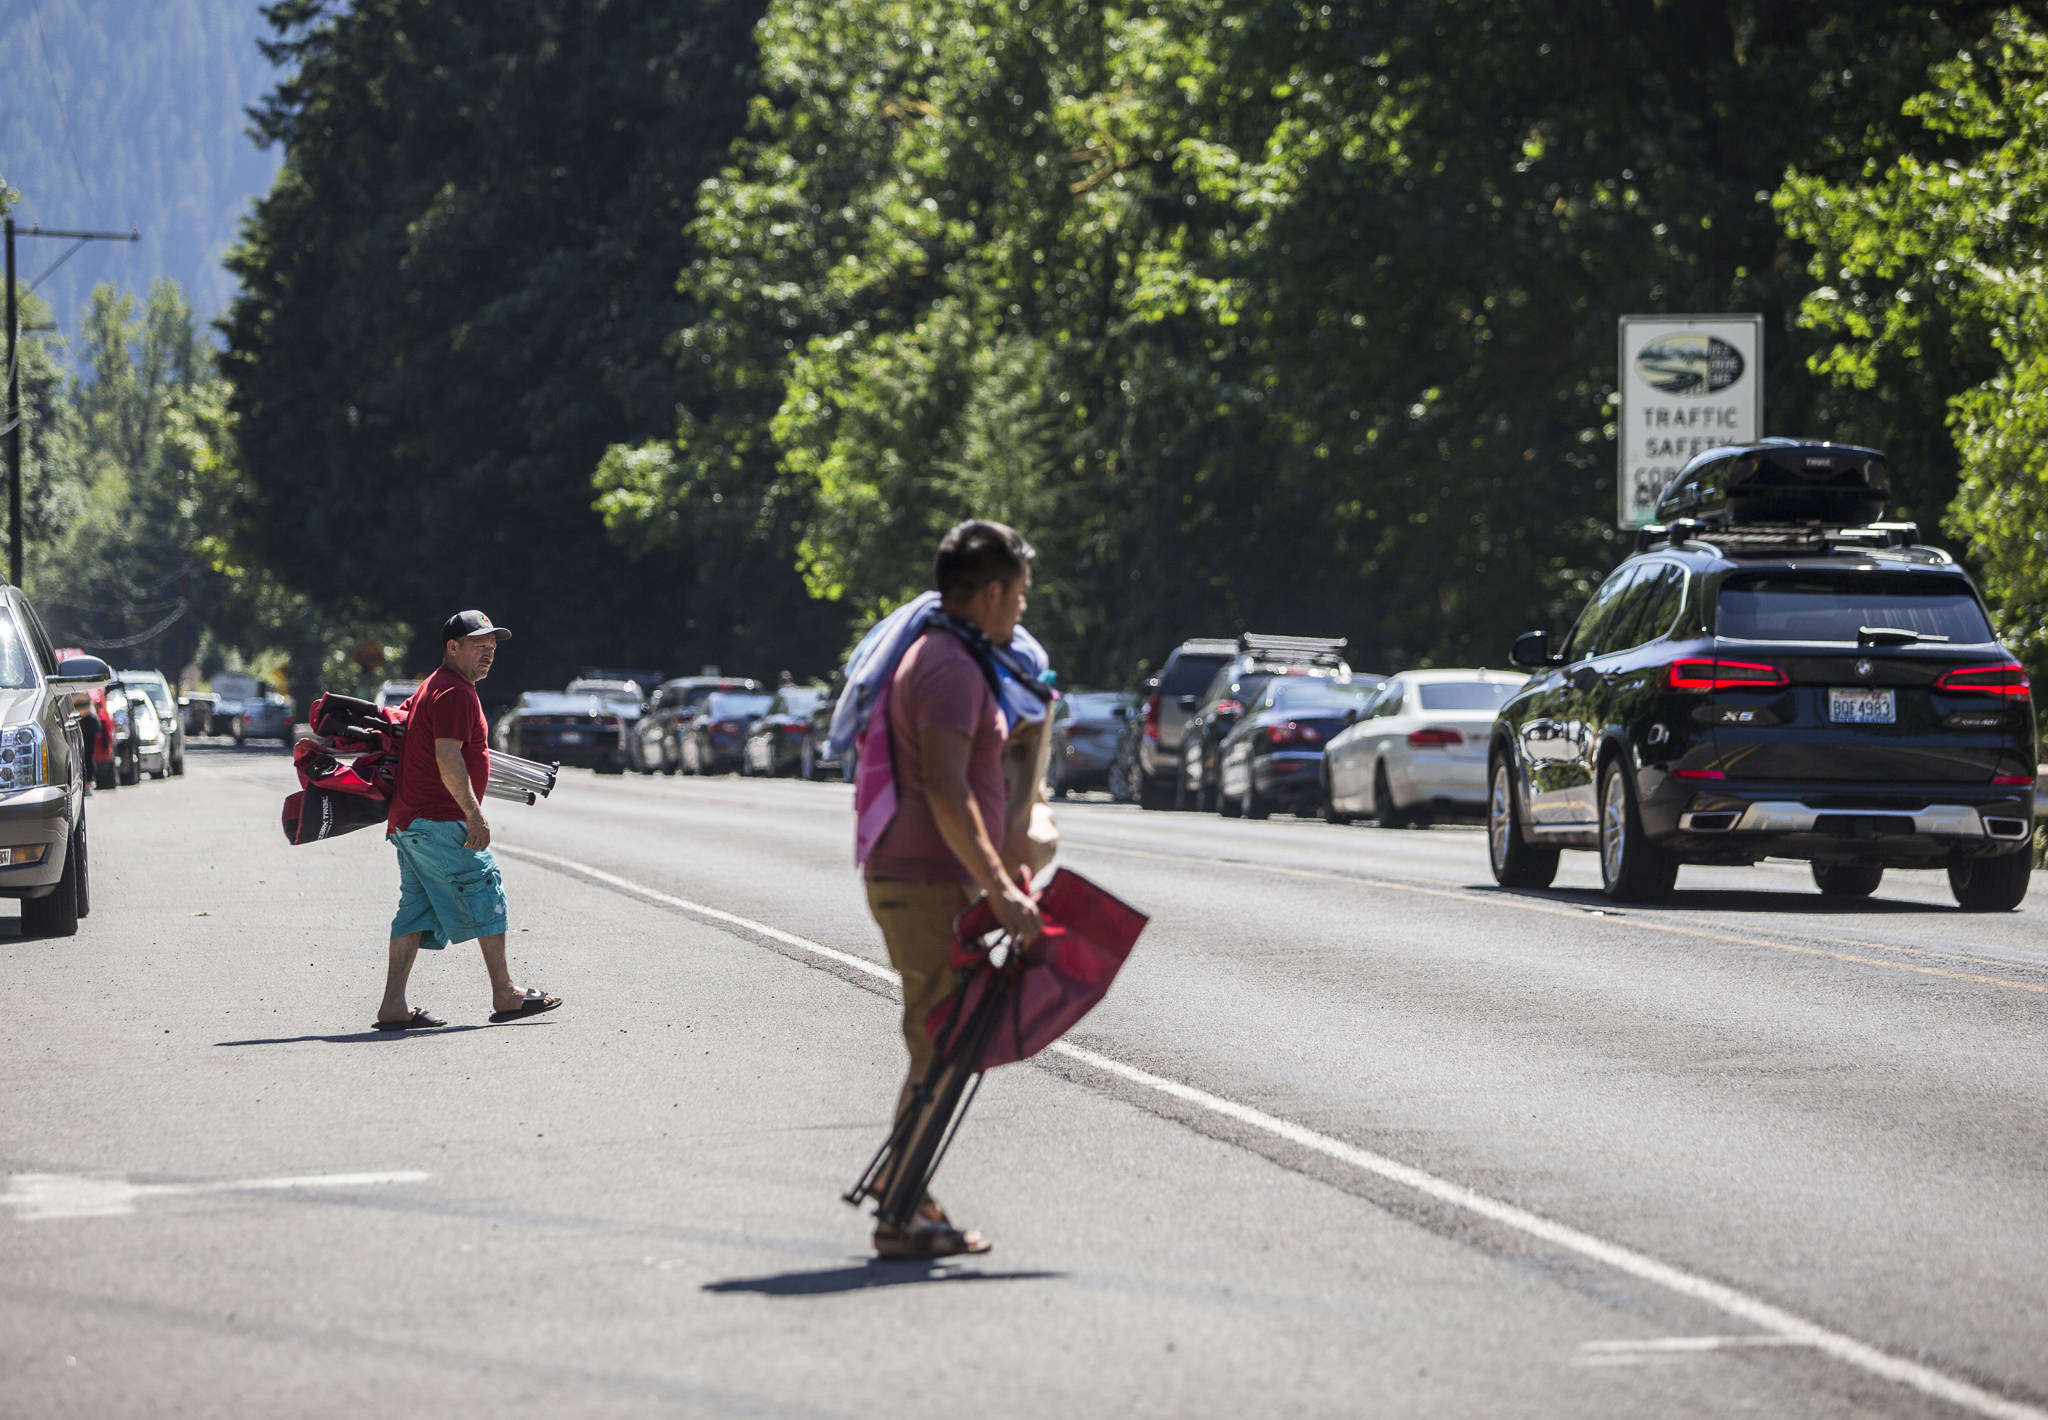 People wait for cars to pass before crossing U.S. 2 to get to Eagle Falls on Wednesday in Index. (Olivia Vanni / The Herald)